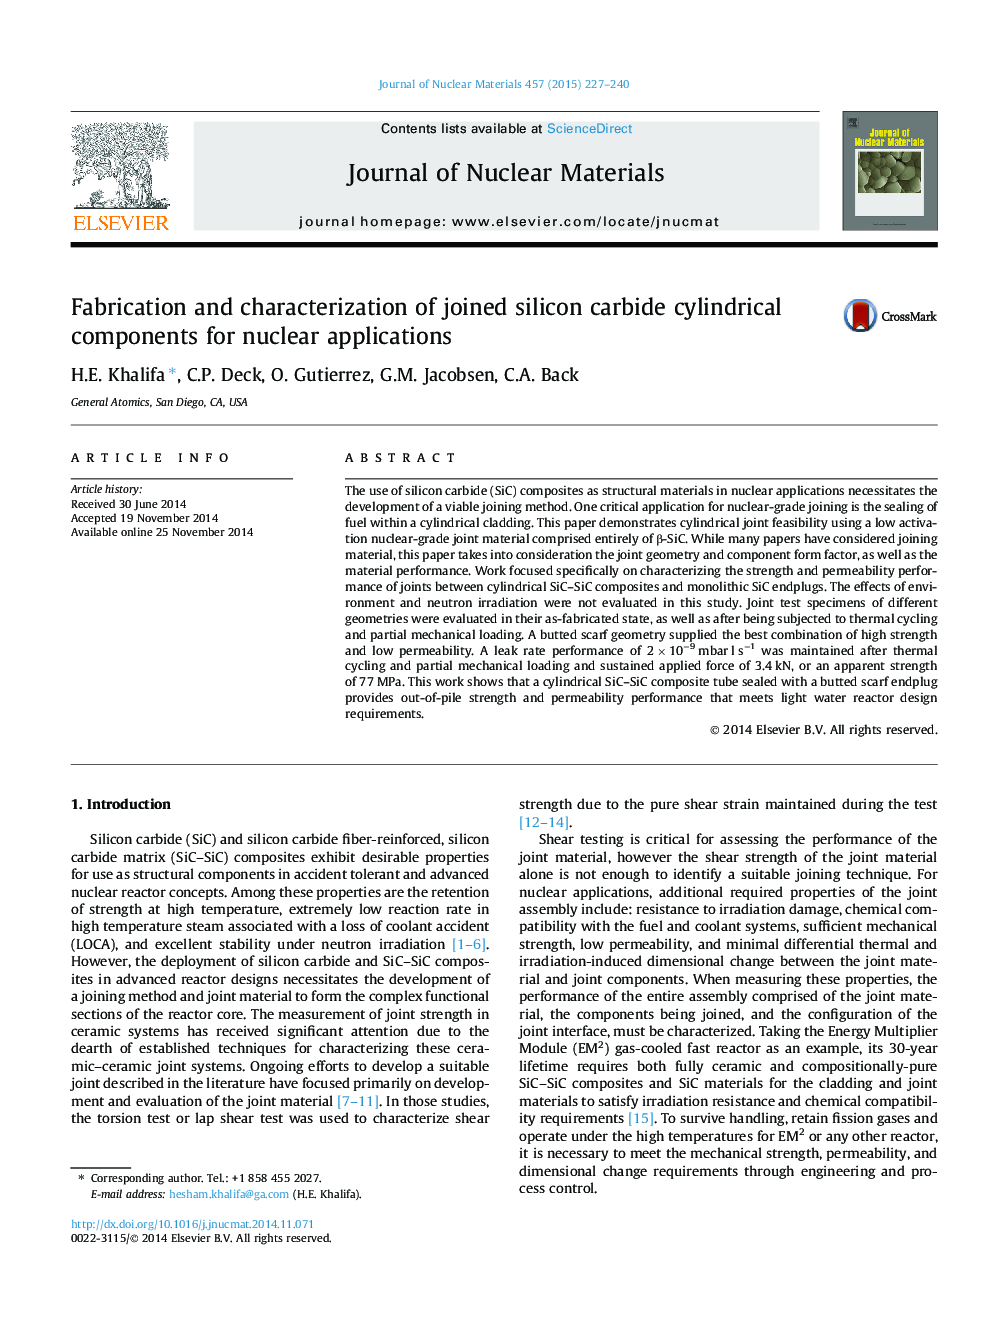 Fabrication and characterization of joined silicon carbide cylindrical components for nuclear applications